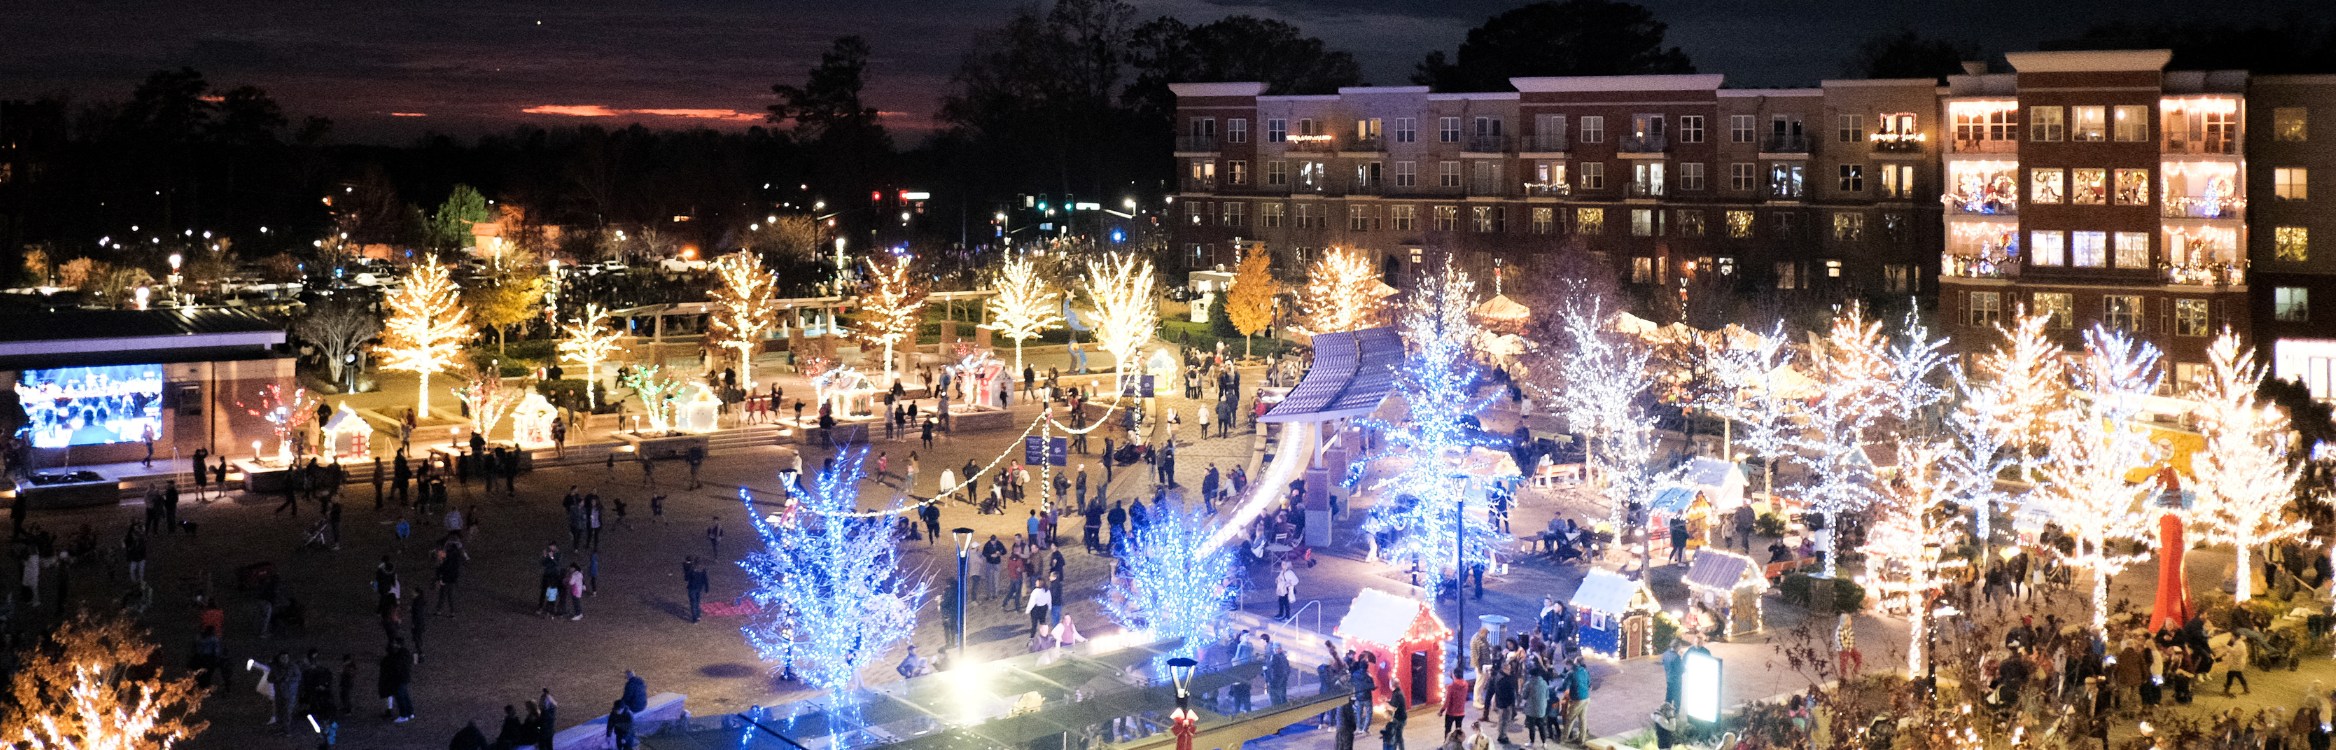 City Springs is lit up with holiday lights